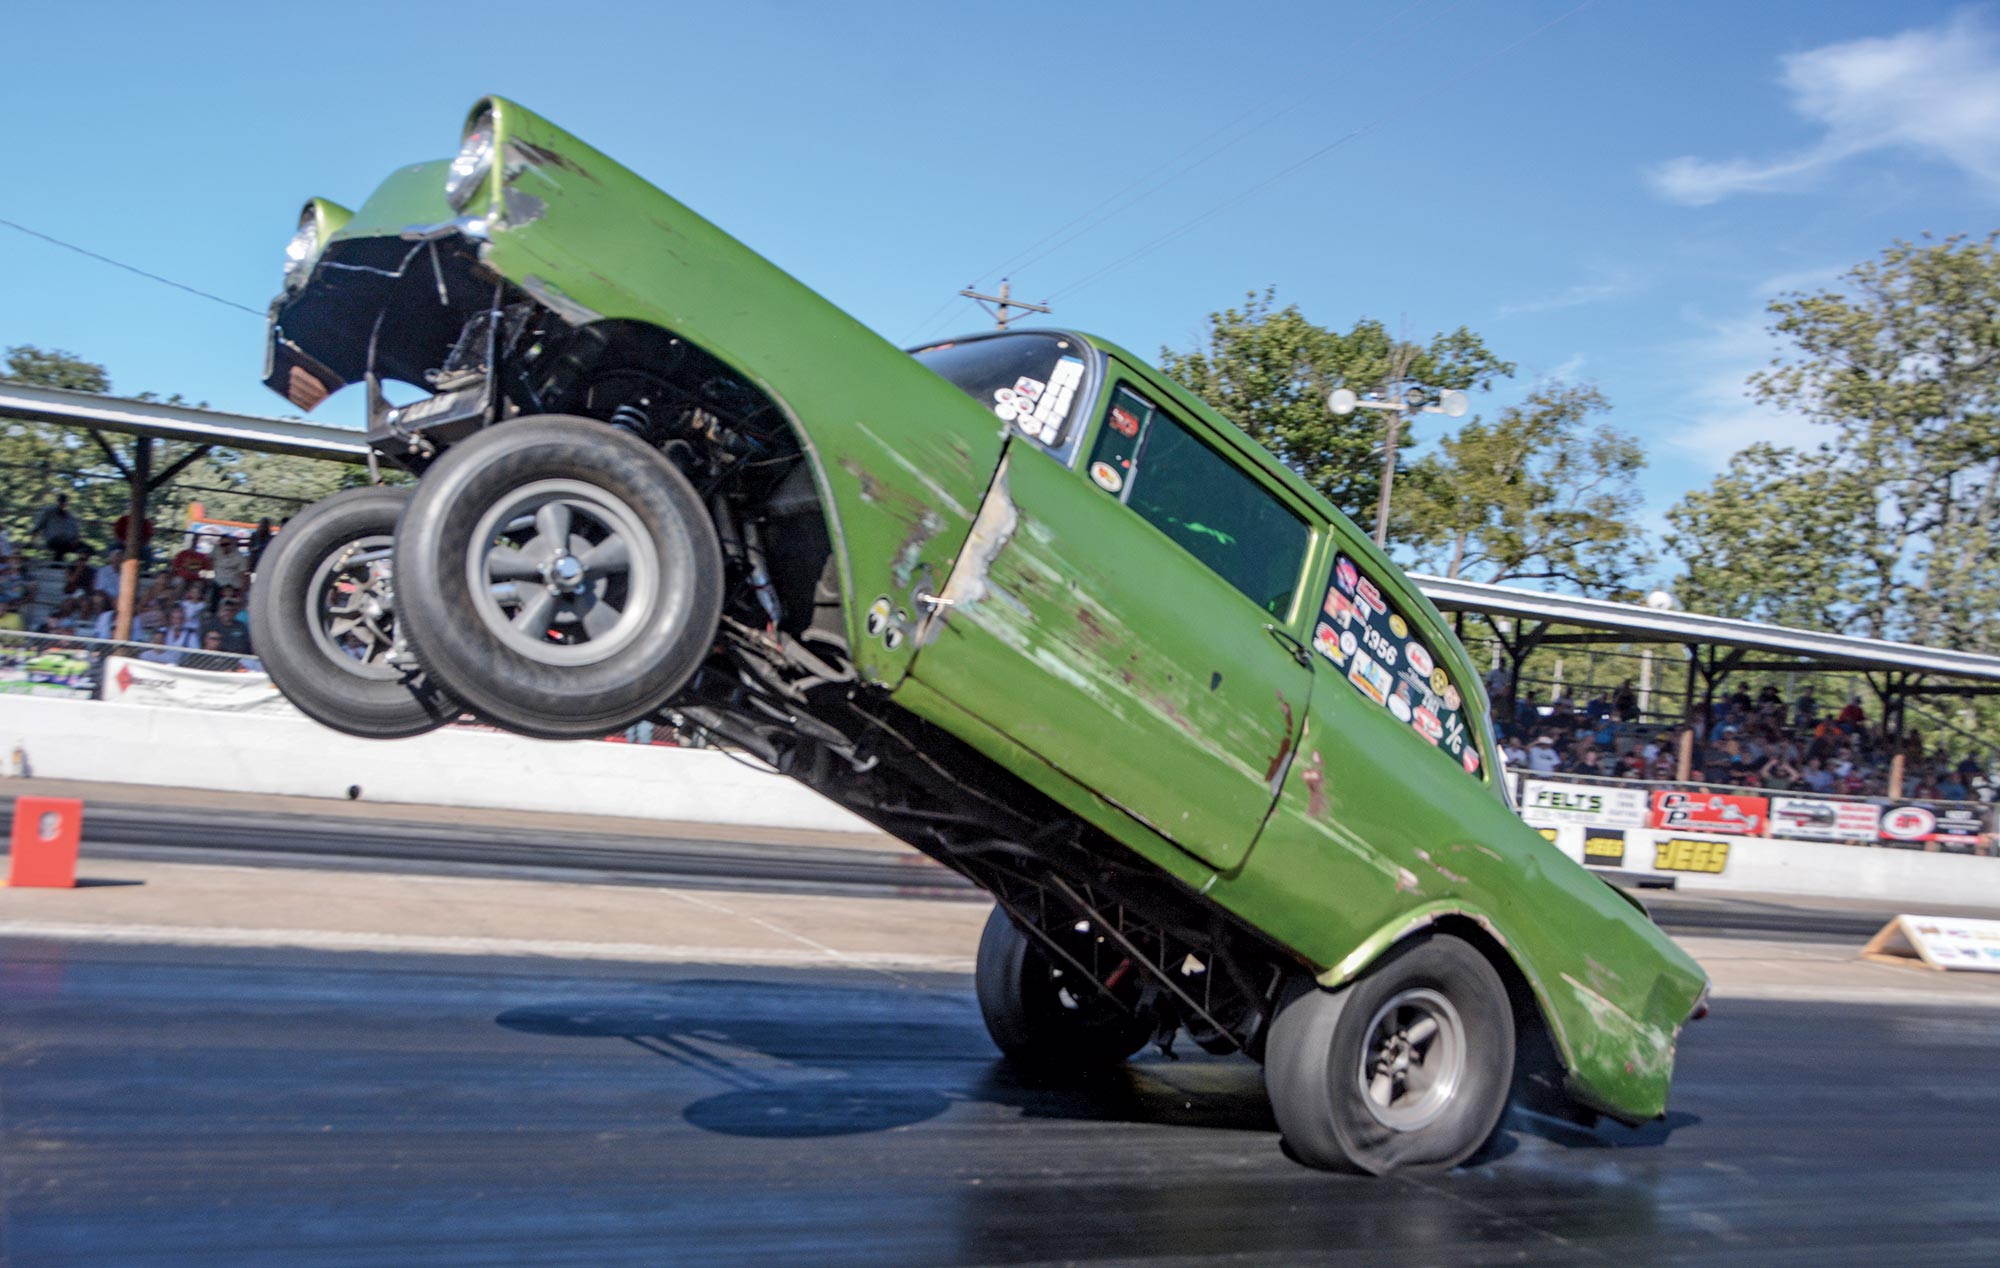 Mike Bilina’s green ‘56 Chevy with the front wheels in the air